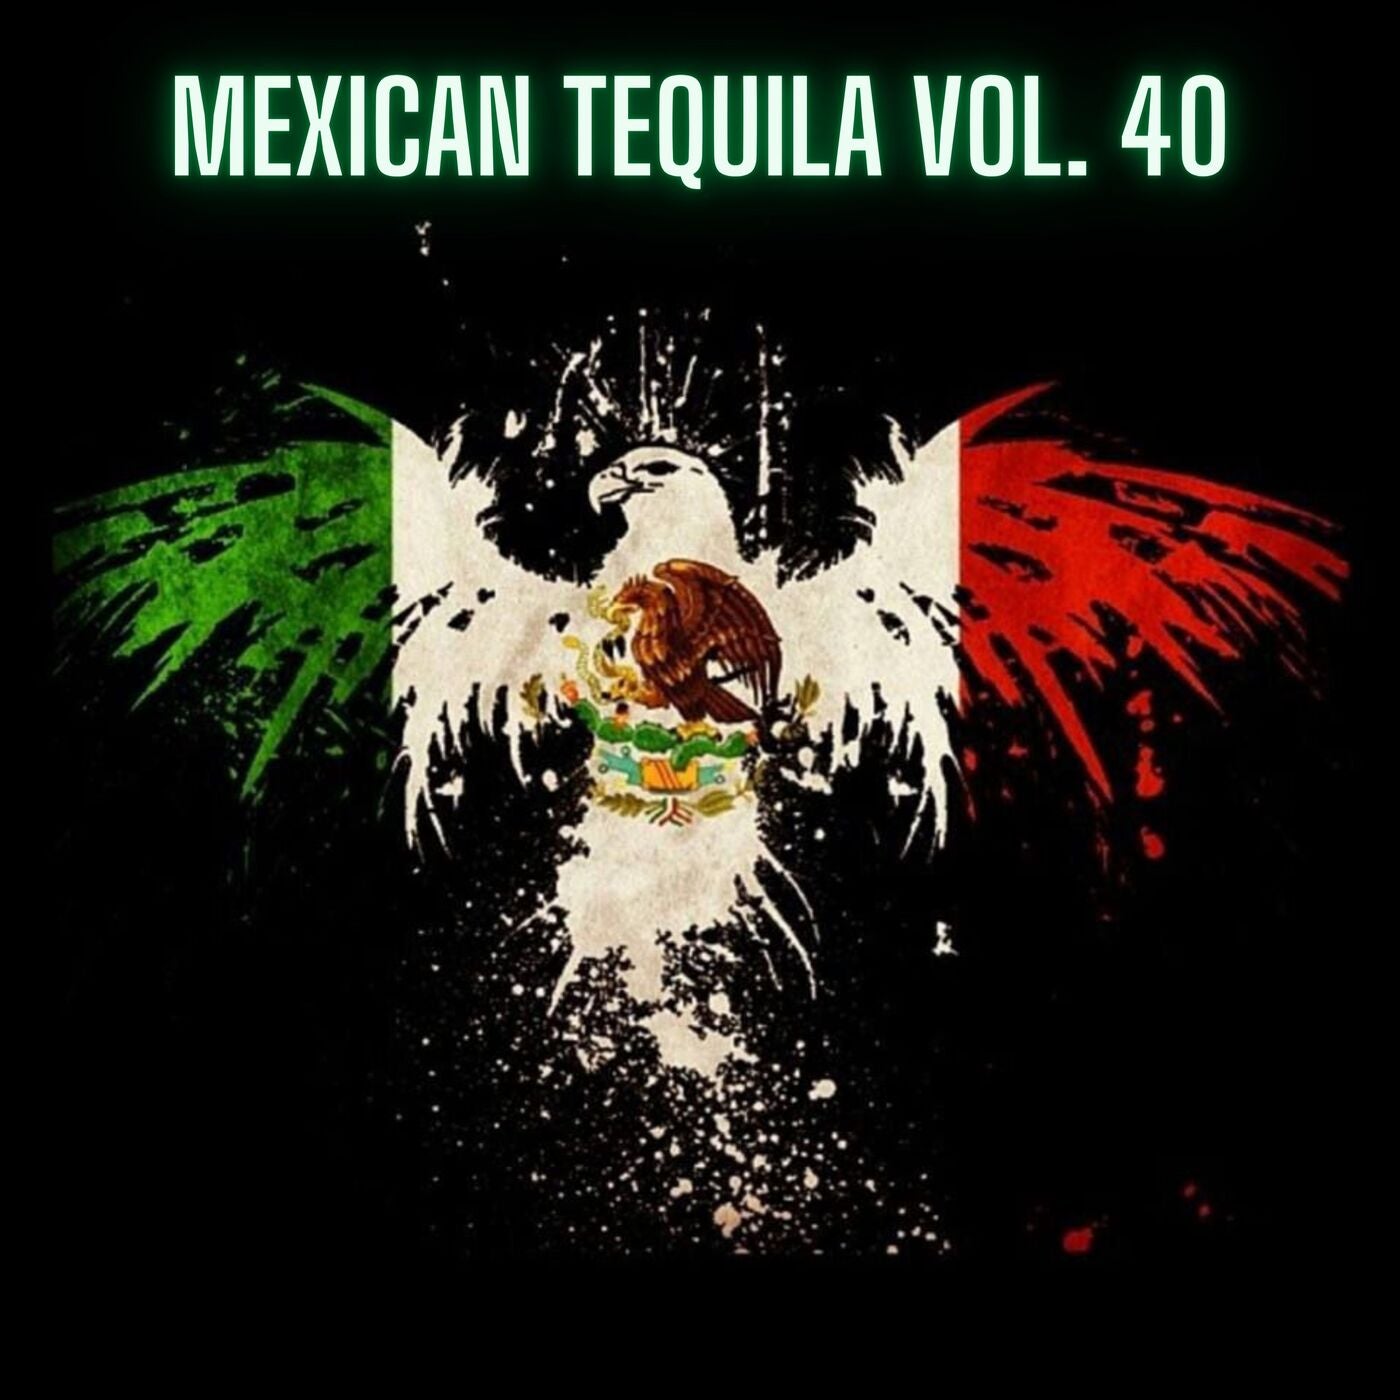 Mexican Tequila Vol. 40